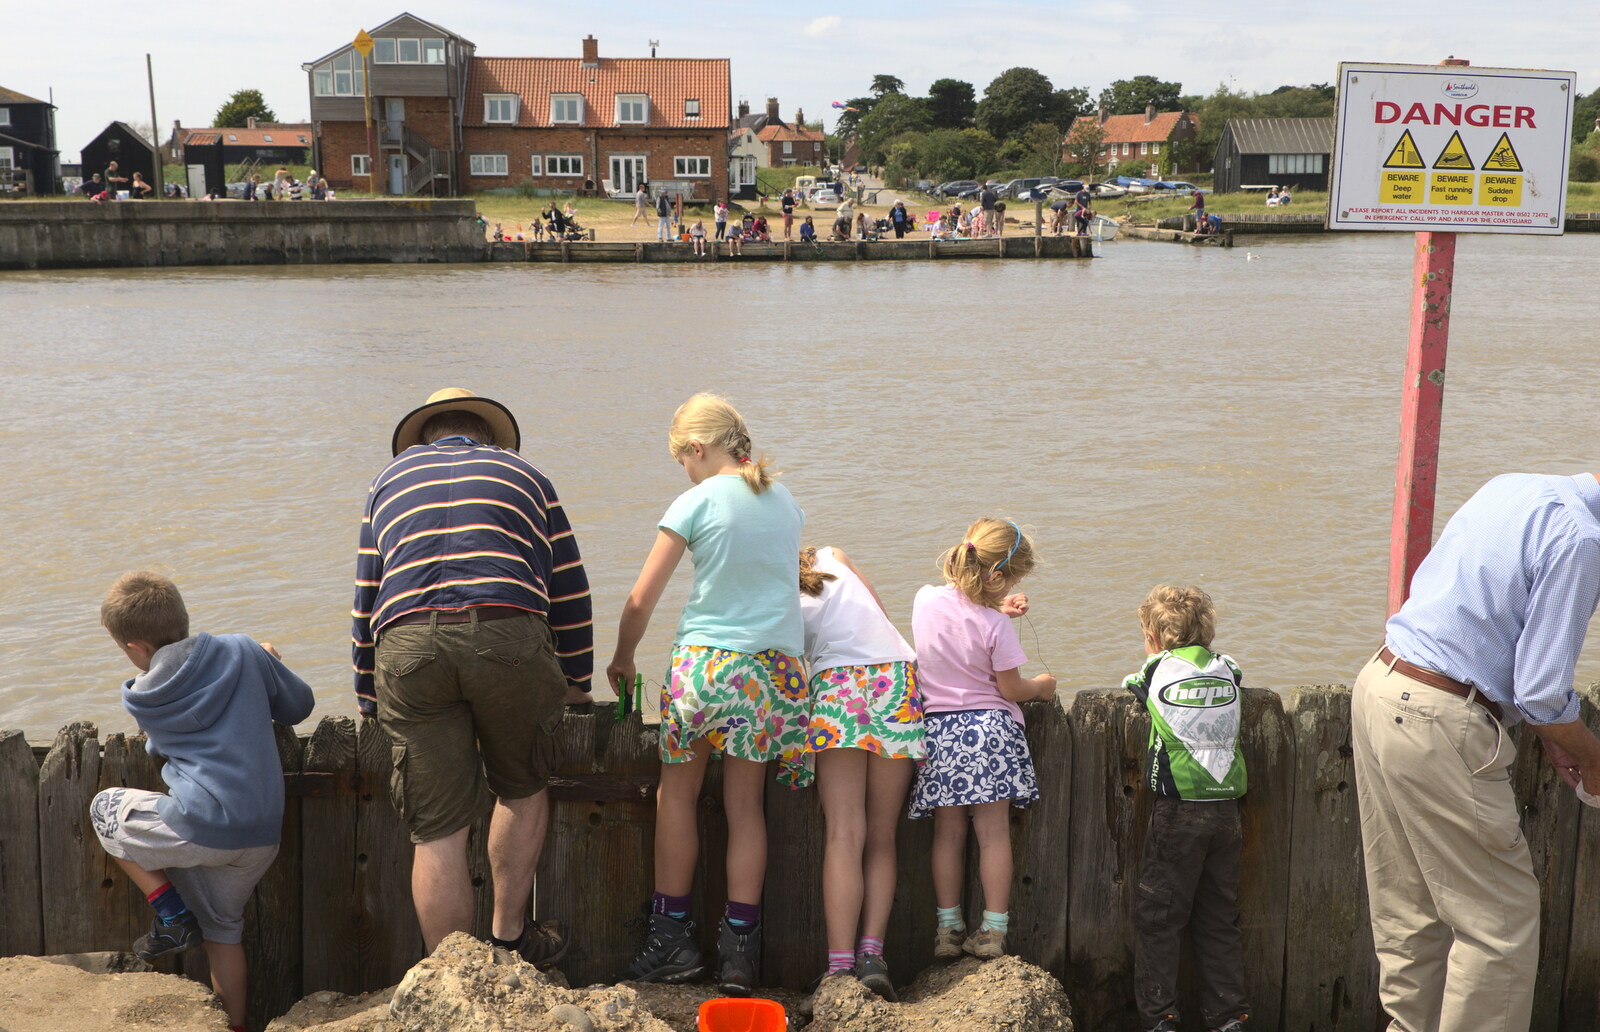 Fred's new Crab Gang hang on the wall from The Danger of Trees: A Camping (Mis)adventure - Southwold, Suffolk - 3rd August 2015